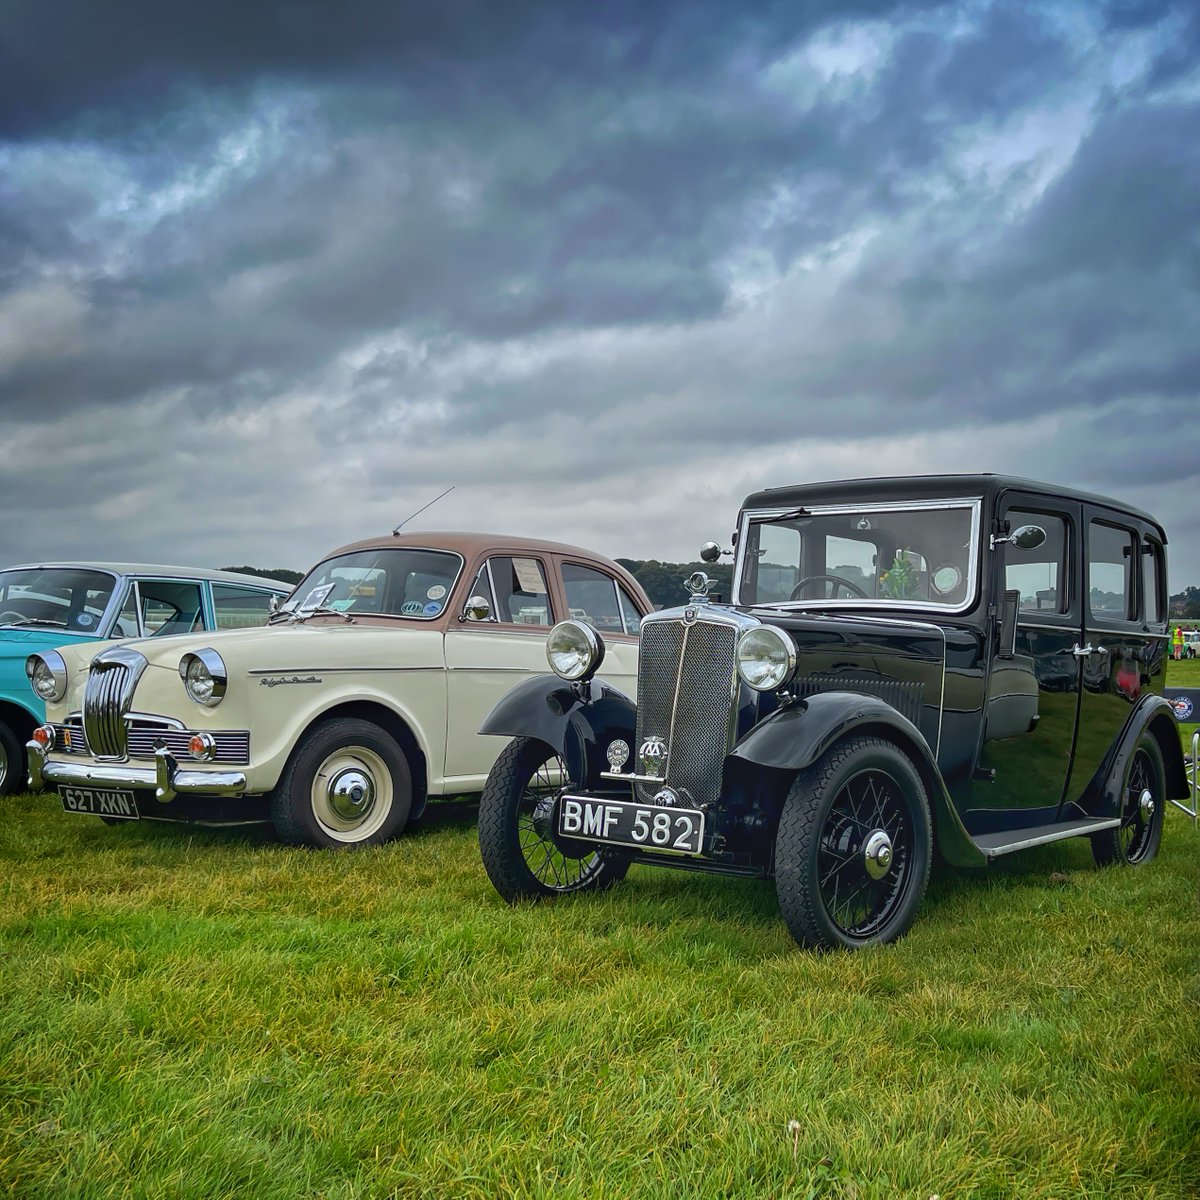 always a great mix of cars at the YHVG events

full-res downloads, prints, wall art and gifts in the #YorkHistoricVehicleGroup gallery on pmhimages.com

 #car #cars #carenthusiast #carenthusiasts #petrolheads #britishmotors #britishmotorenthusiast #classicbritish